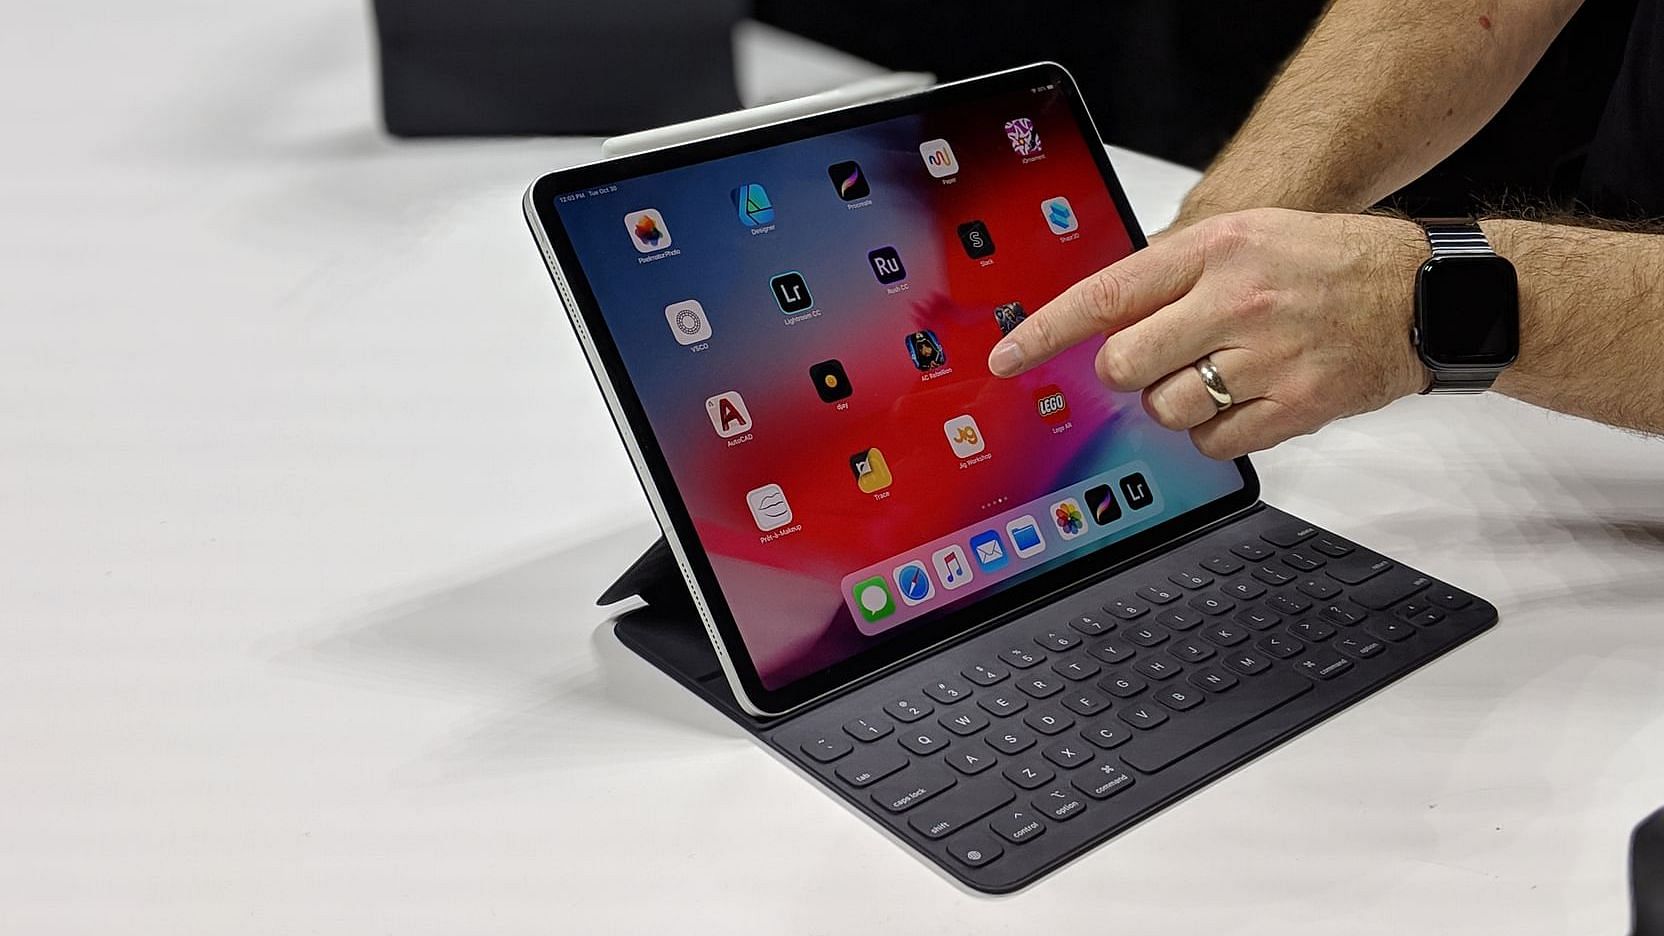 Only select models of the third-generation iPad Air tablets are part of the program.